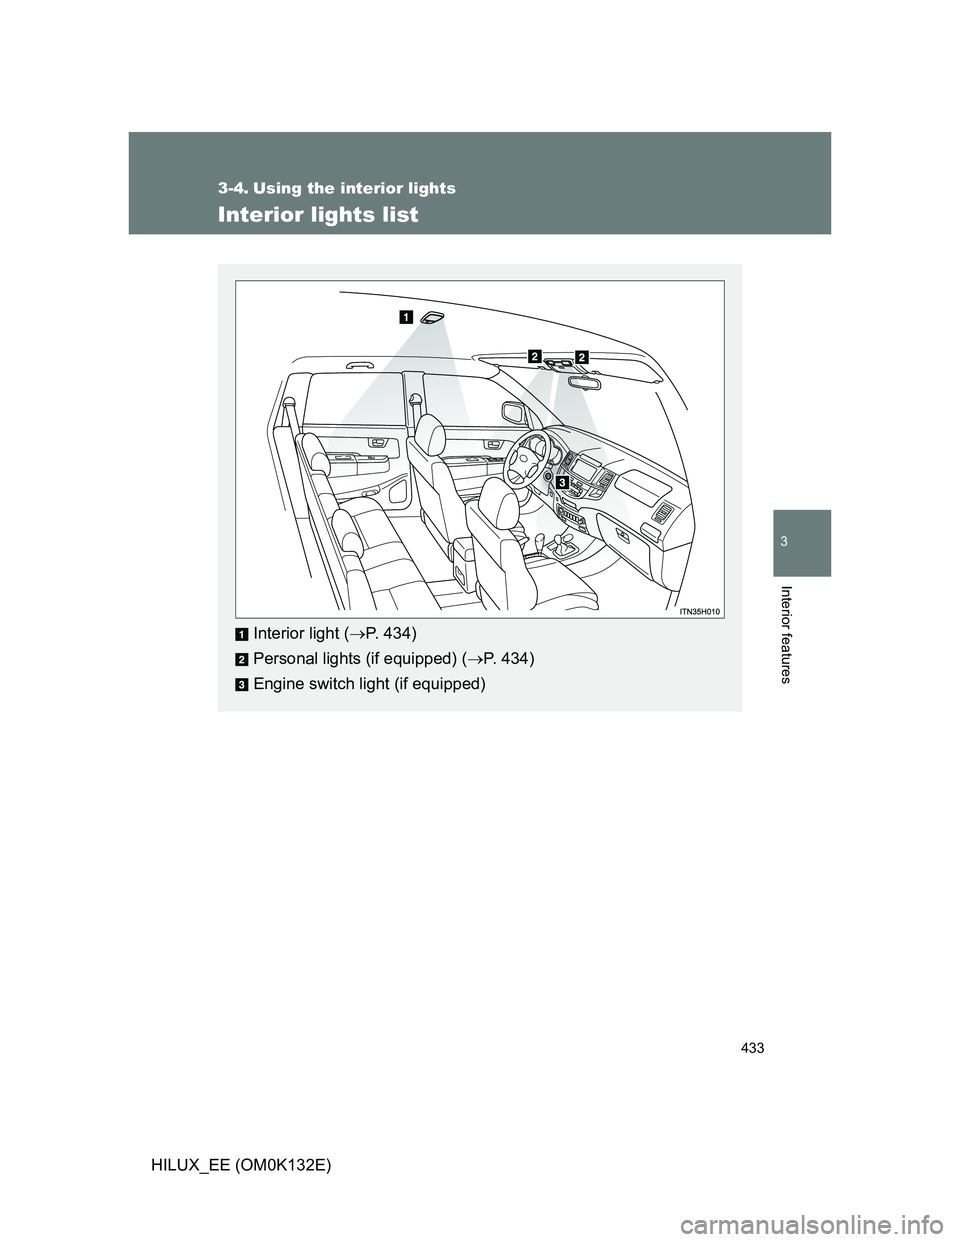 TOYOTA HILUX 2012  Owners Manual (in English) 433
3
Interior features
HILUX_EE (OM0K132E)
3-4. Using the interior lights
Interior lights list
Interior light (P. 434)
Personal lights (if equipped) (P. 434)
Engine switch light (if equipped) 